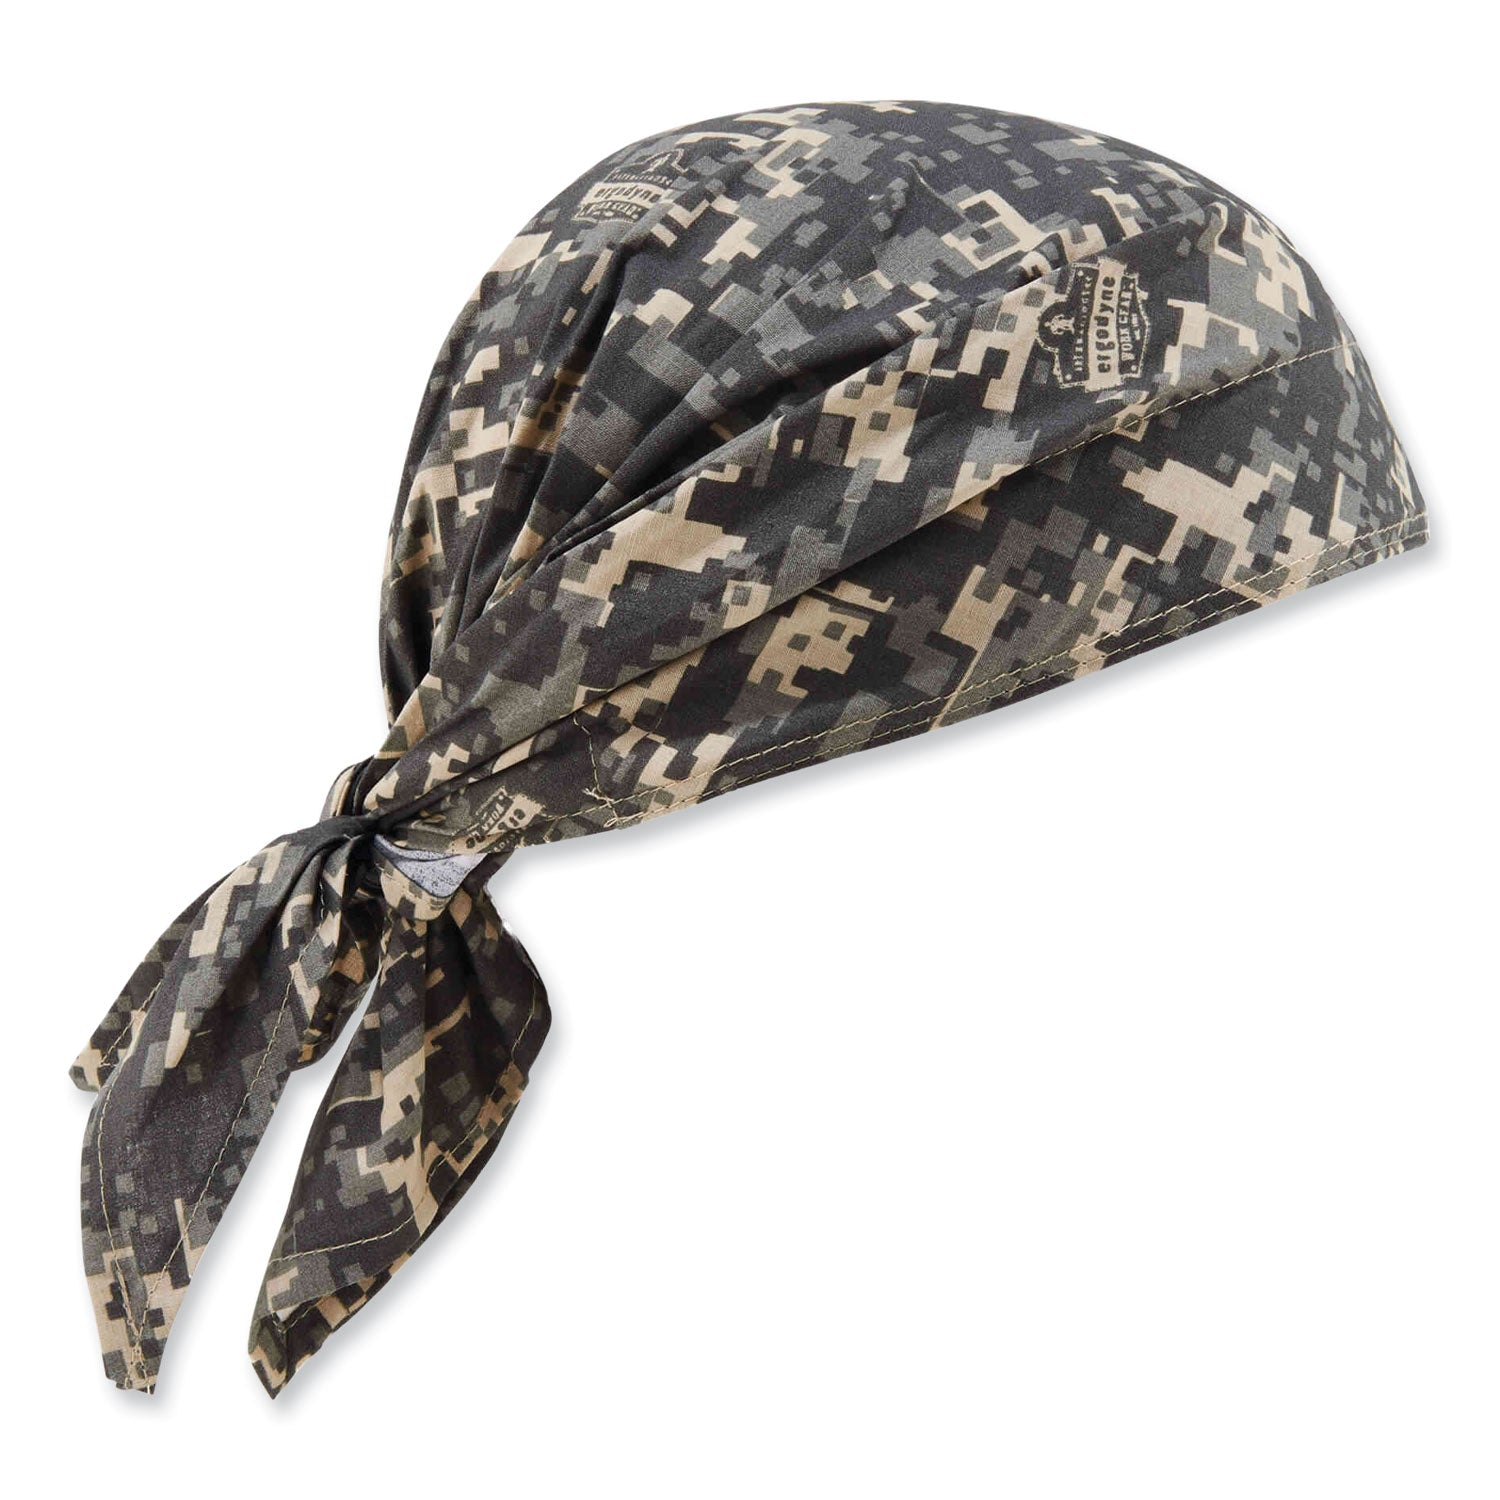 chill-its-6710-cooling-embedded-polymers-tie-bandana-triangle-hat-one-size-fits-most-camo-ships-in-1-3-business-days_ego12324 - 1